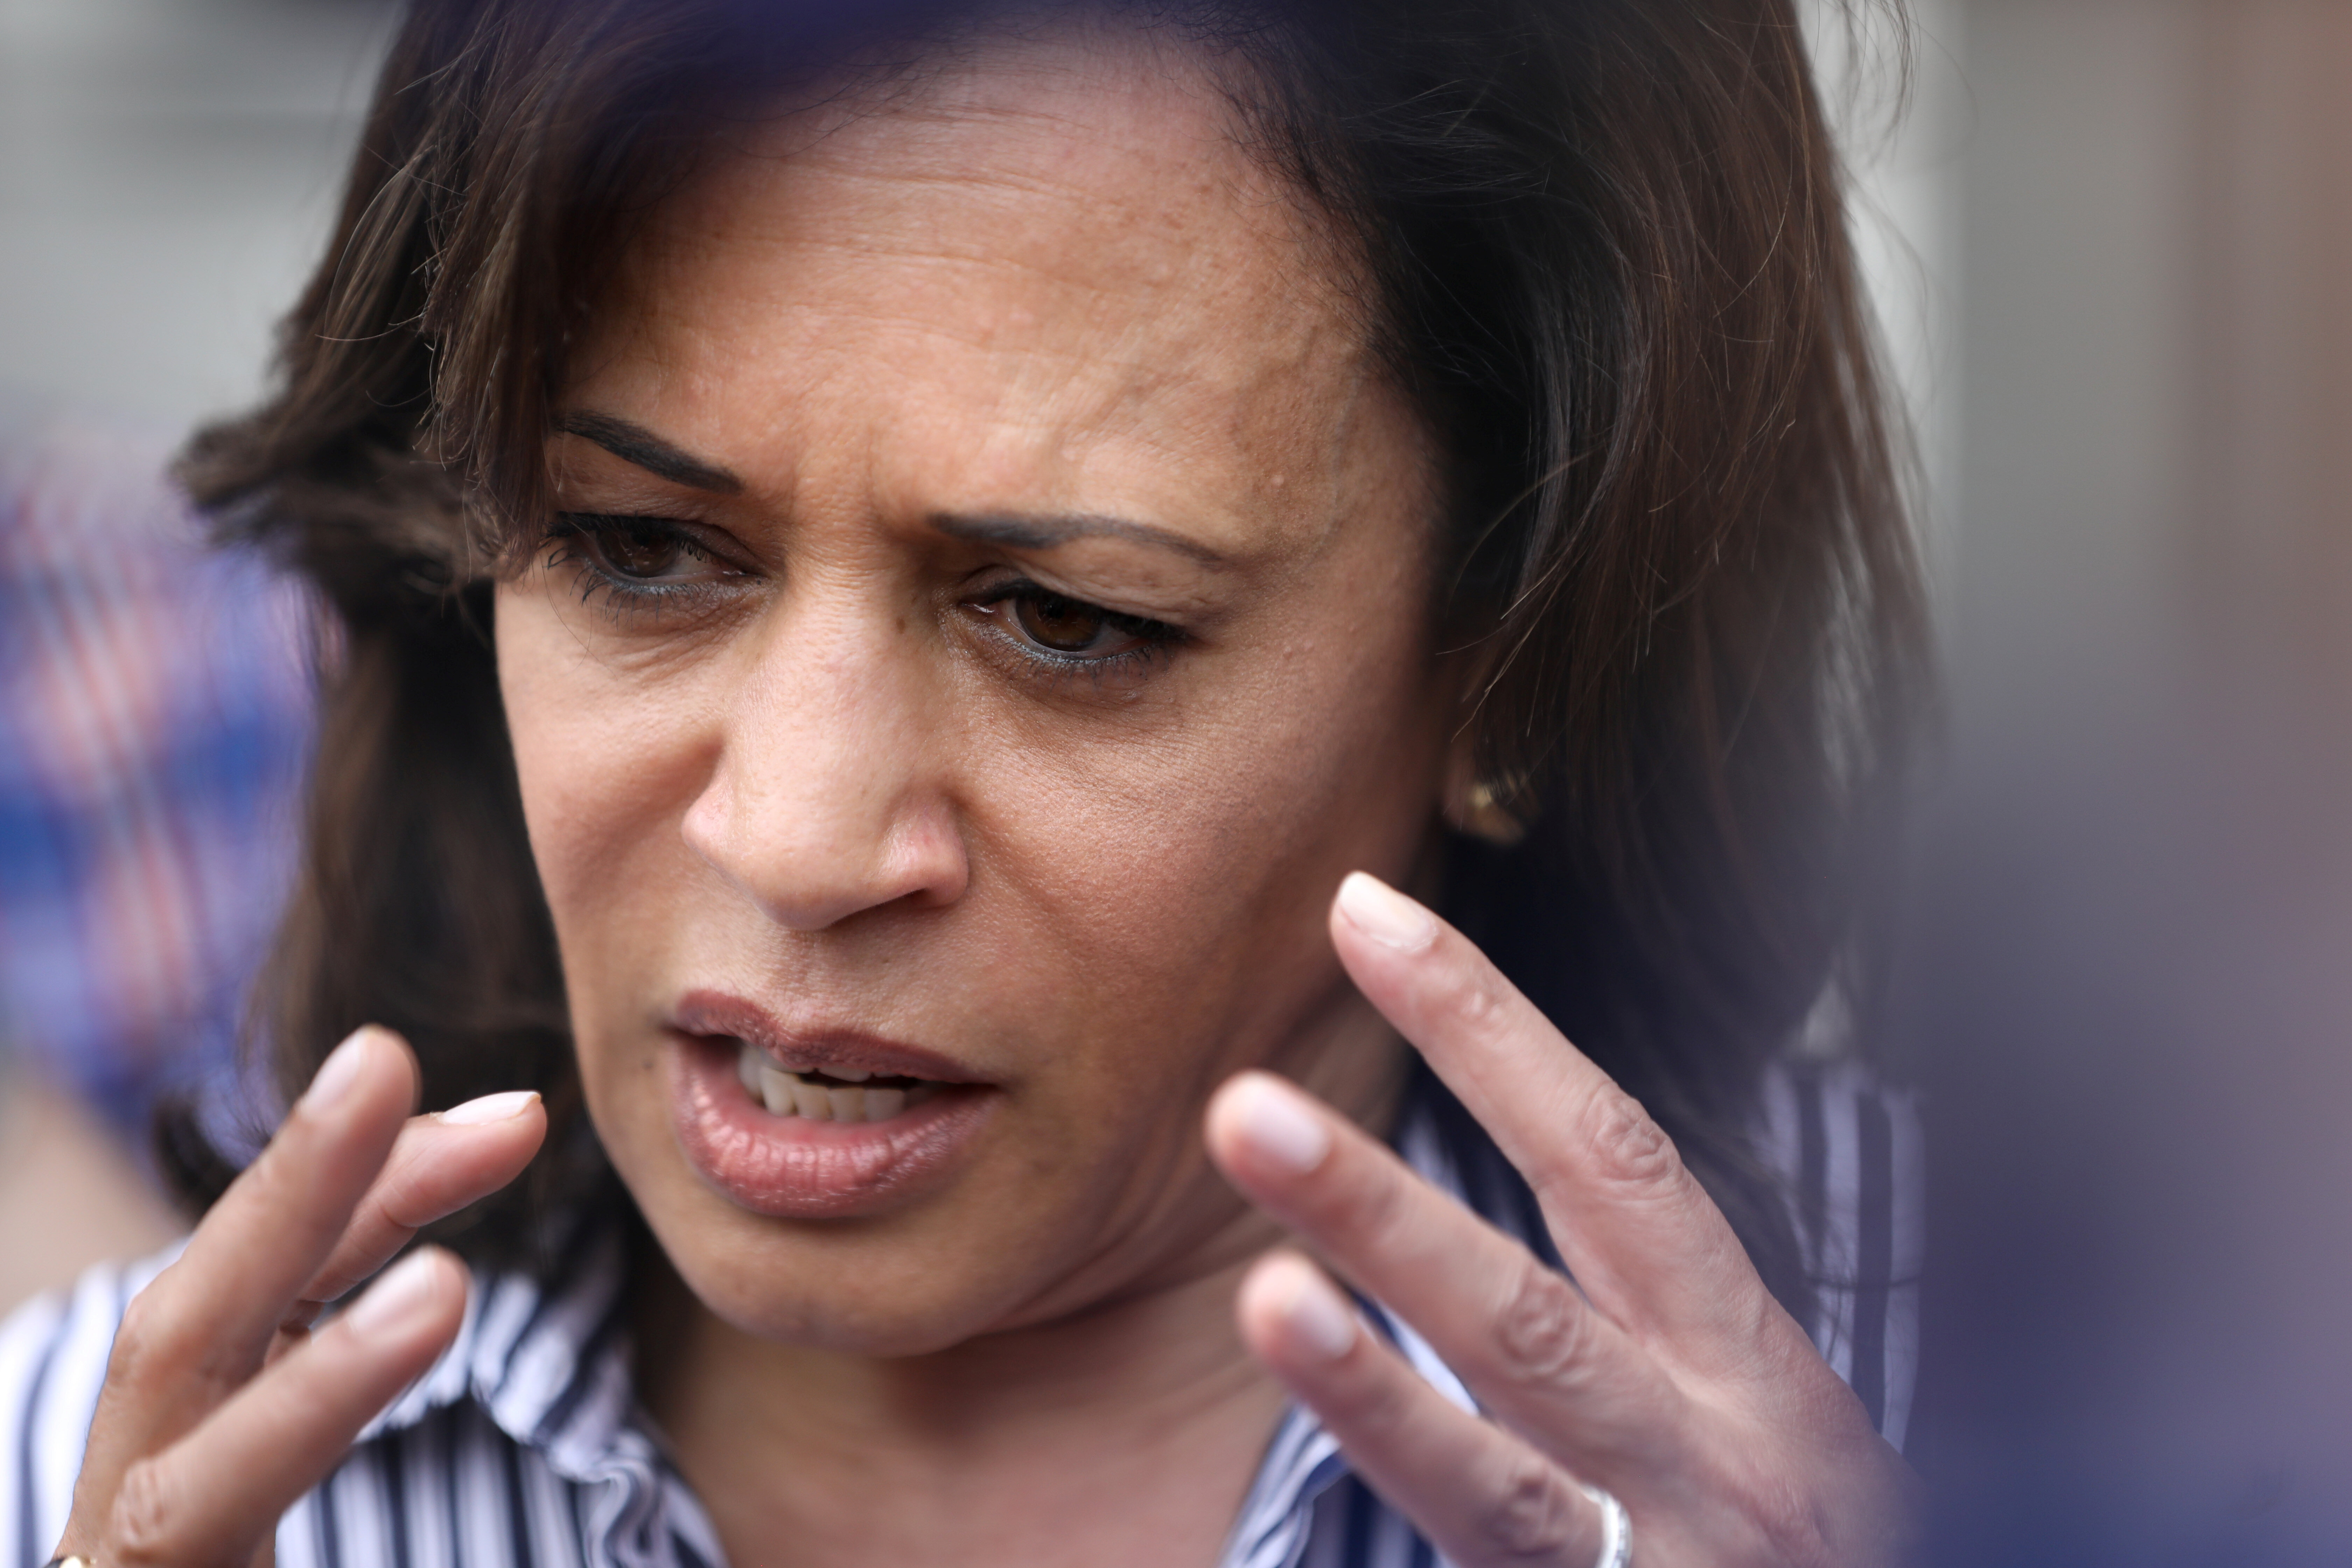 Harris Rips Russian Bots For Kaepernick Furor, Says Theyâ€™re Coming For Her